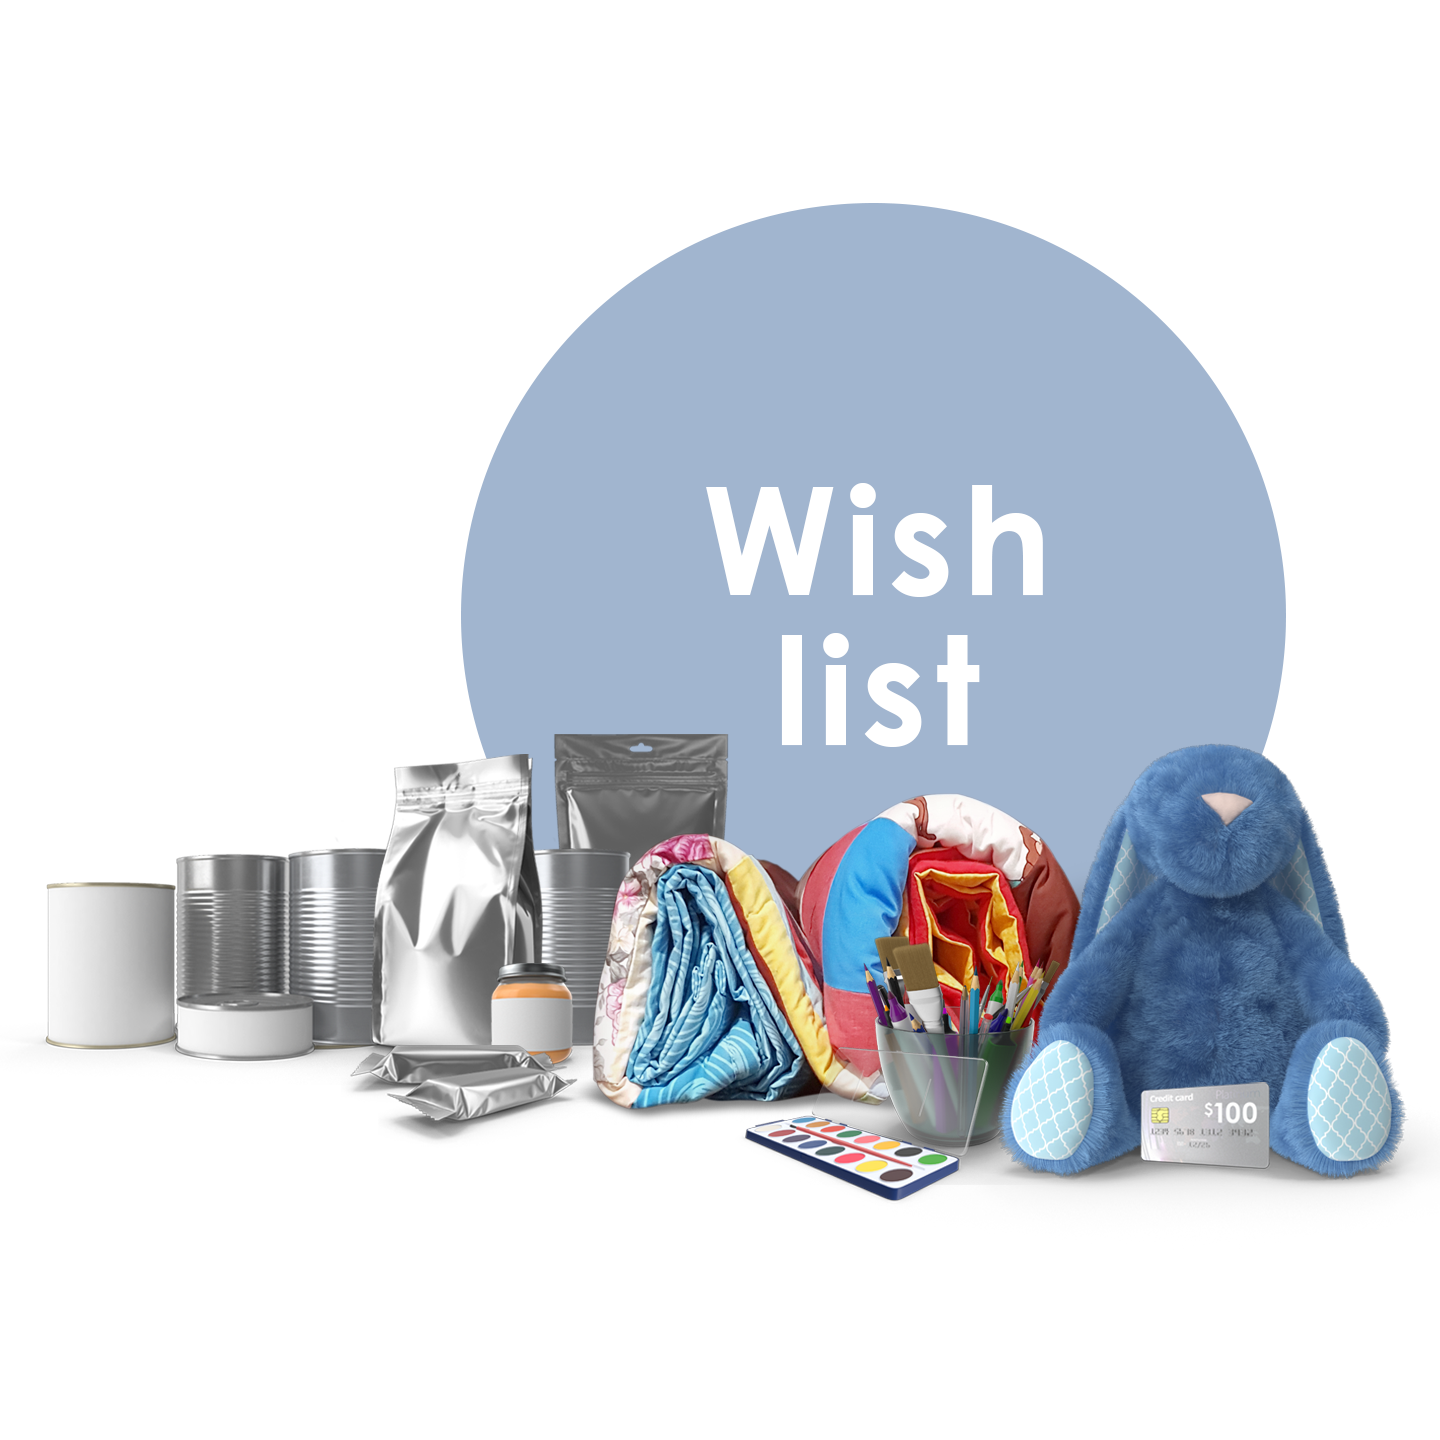 Light blue circle with text that reads "Wish list" with cans of food, blankets, art supplies, stuffed rabbit and gift card.